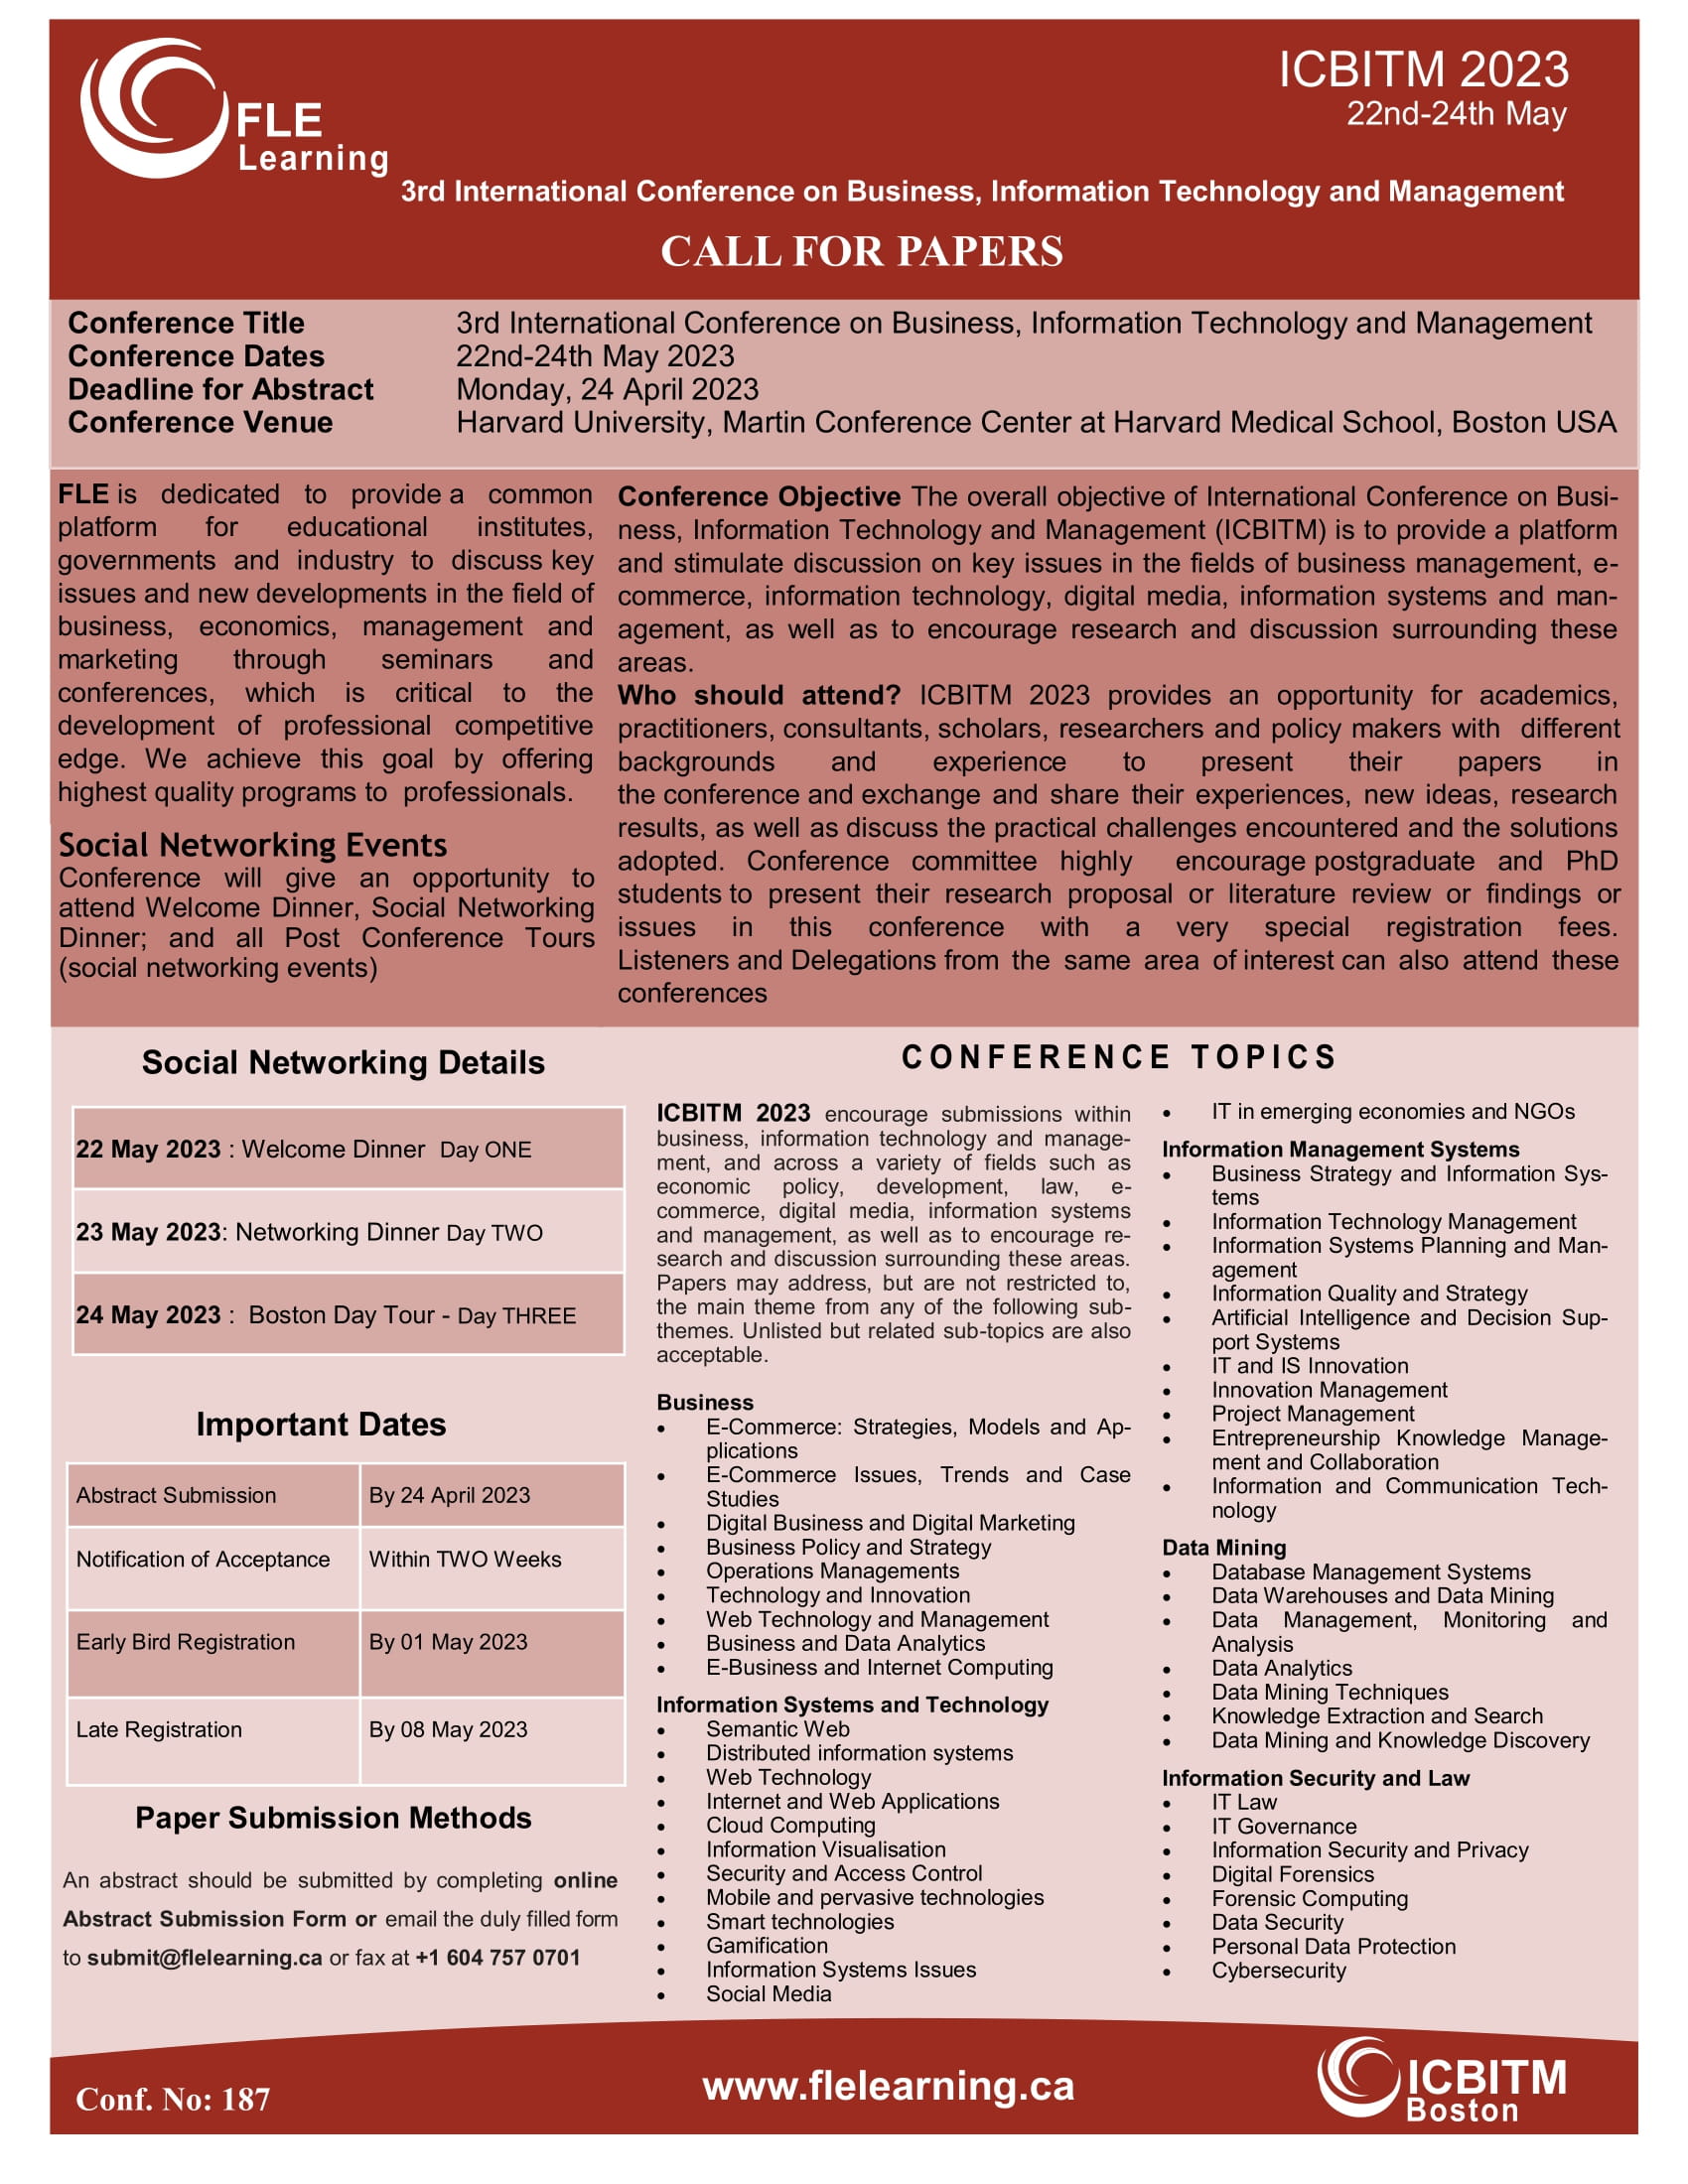 Call for Paper ICBITM 2023 May Boston